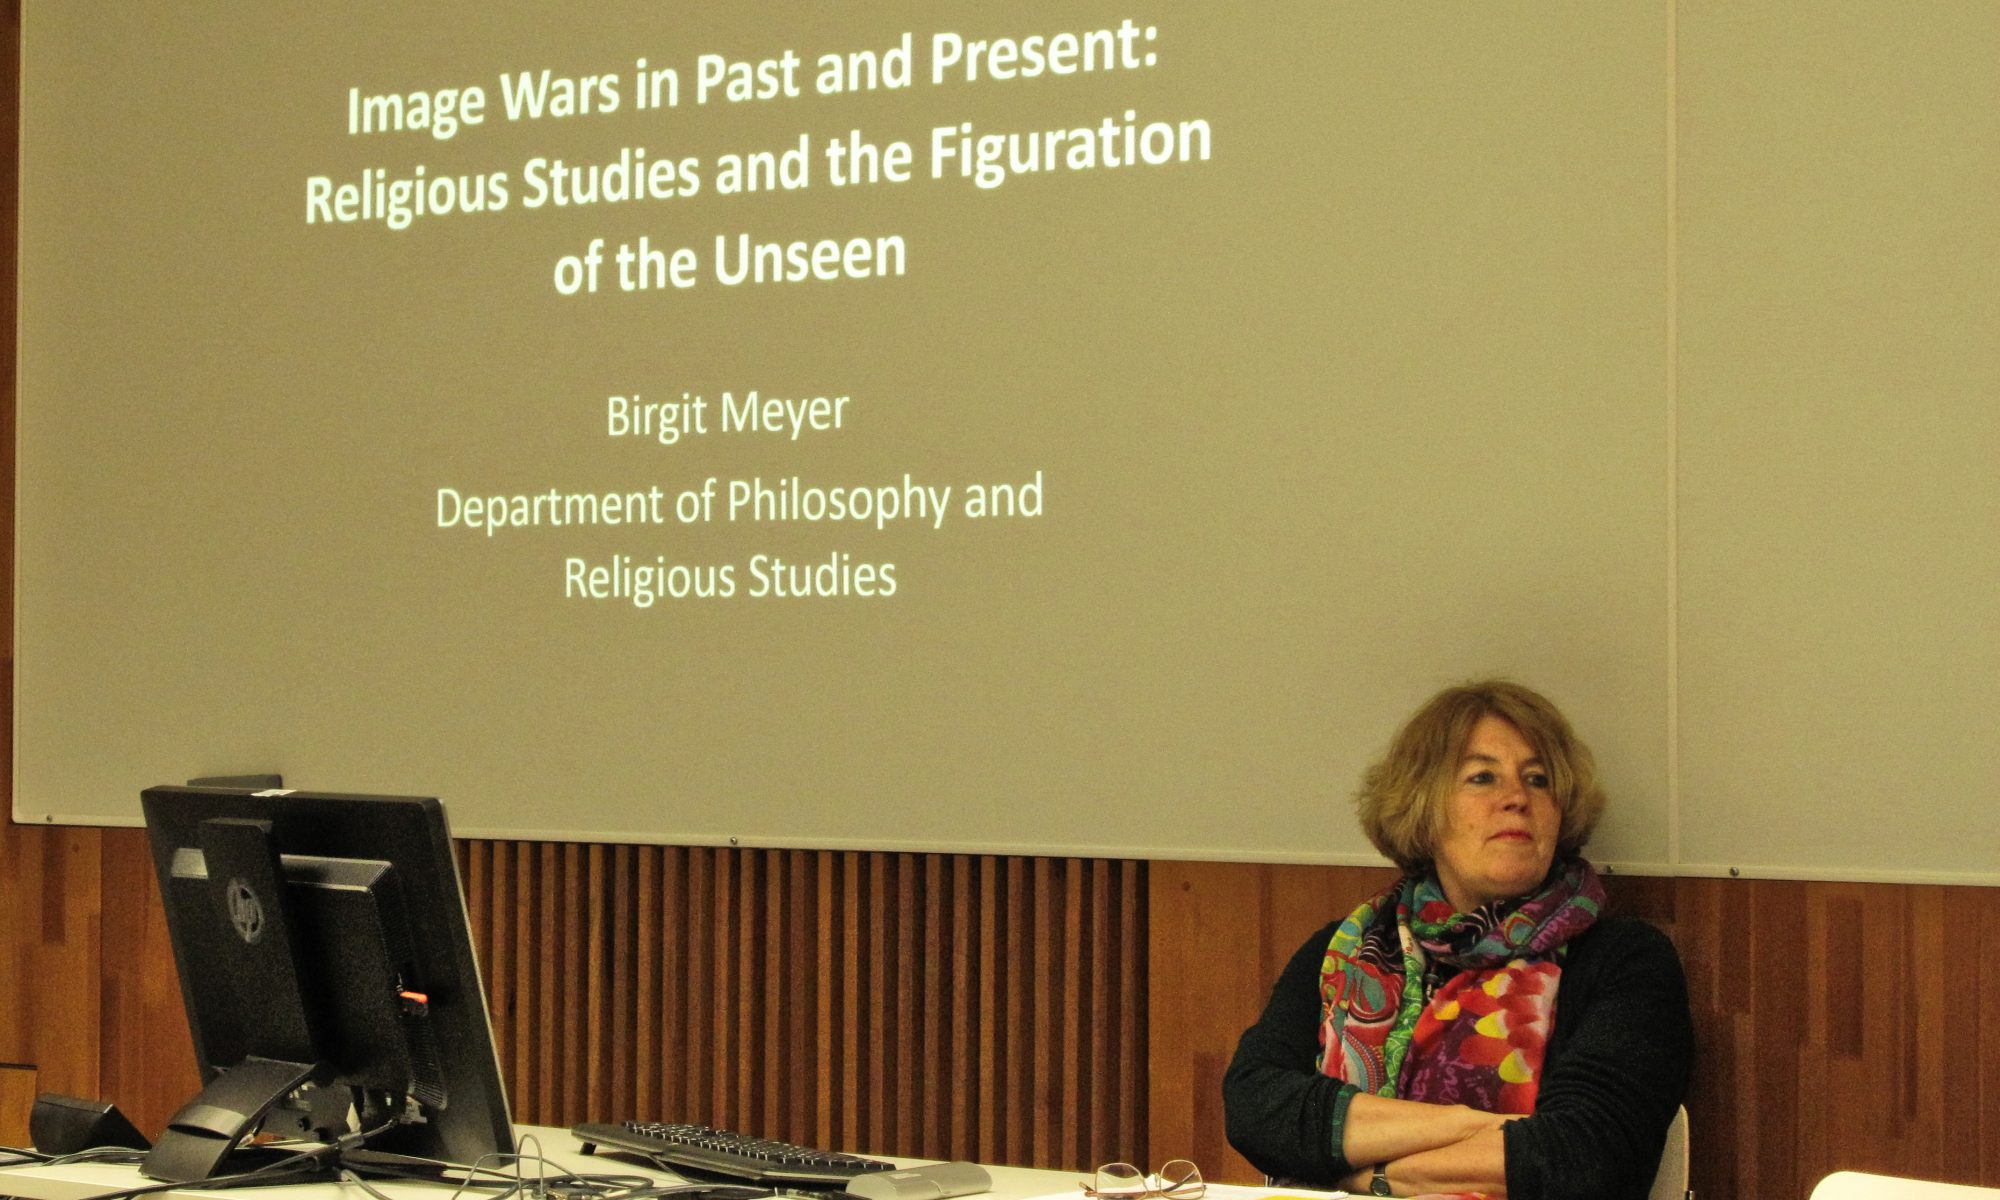 Image Wars in Past and Present: Religious Studies and the Figuration of the Unseen